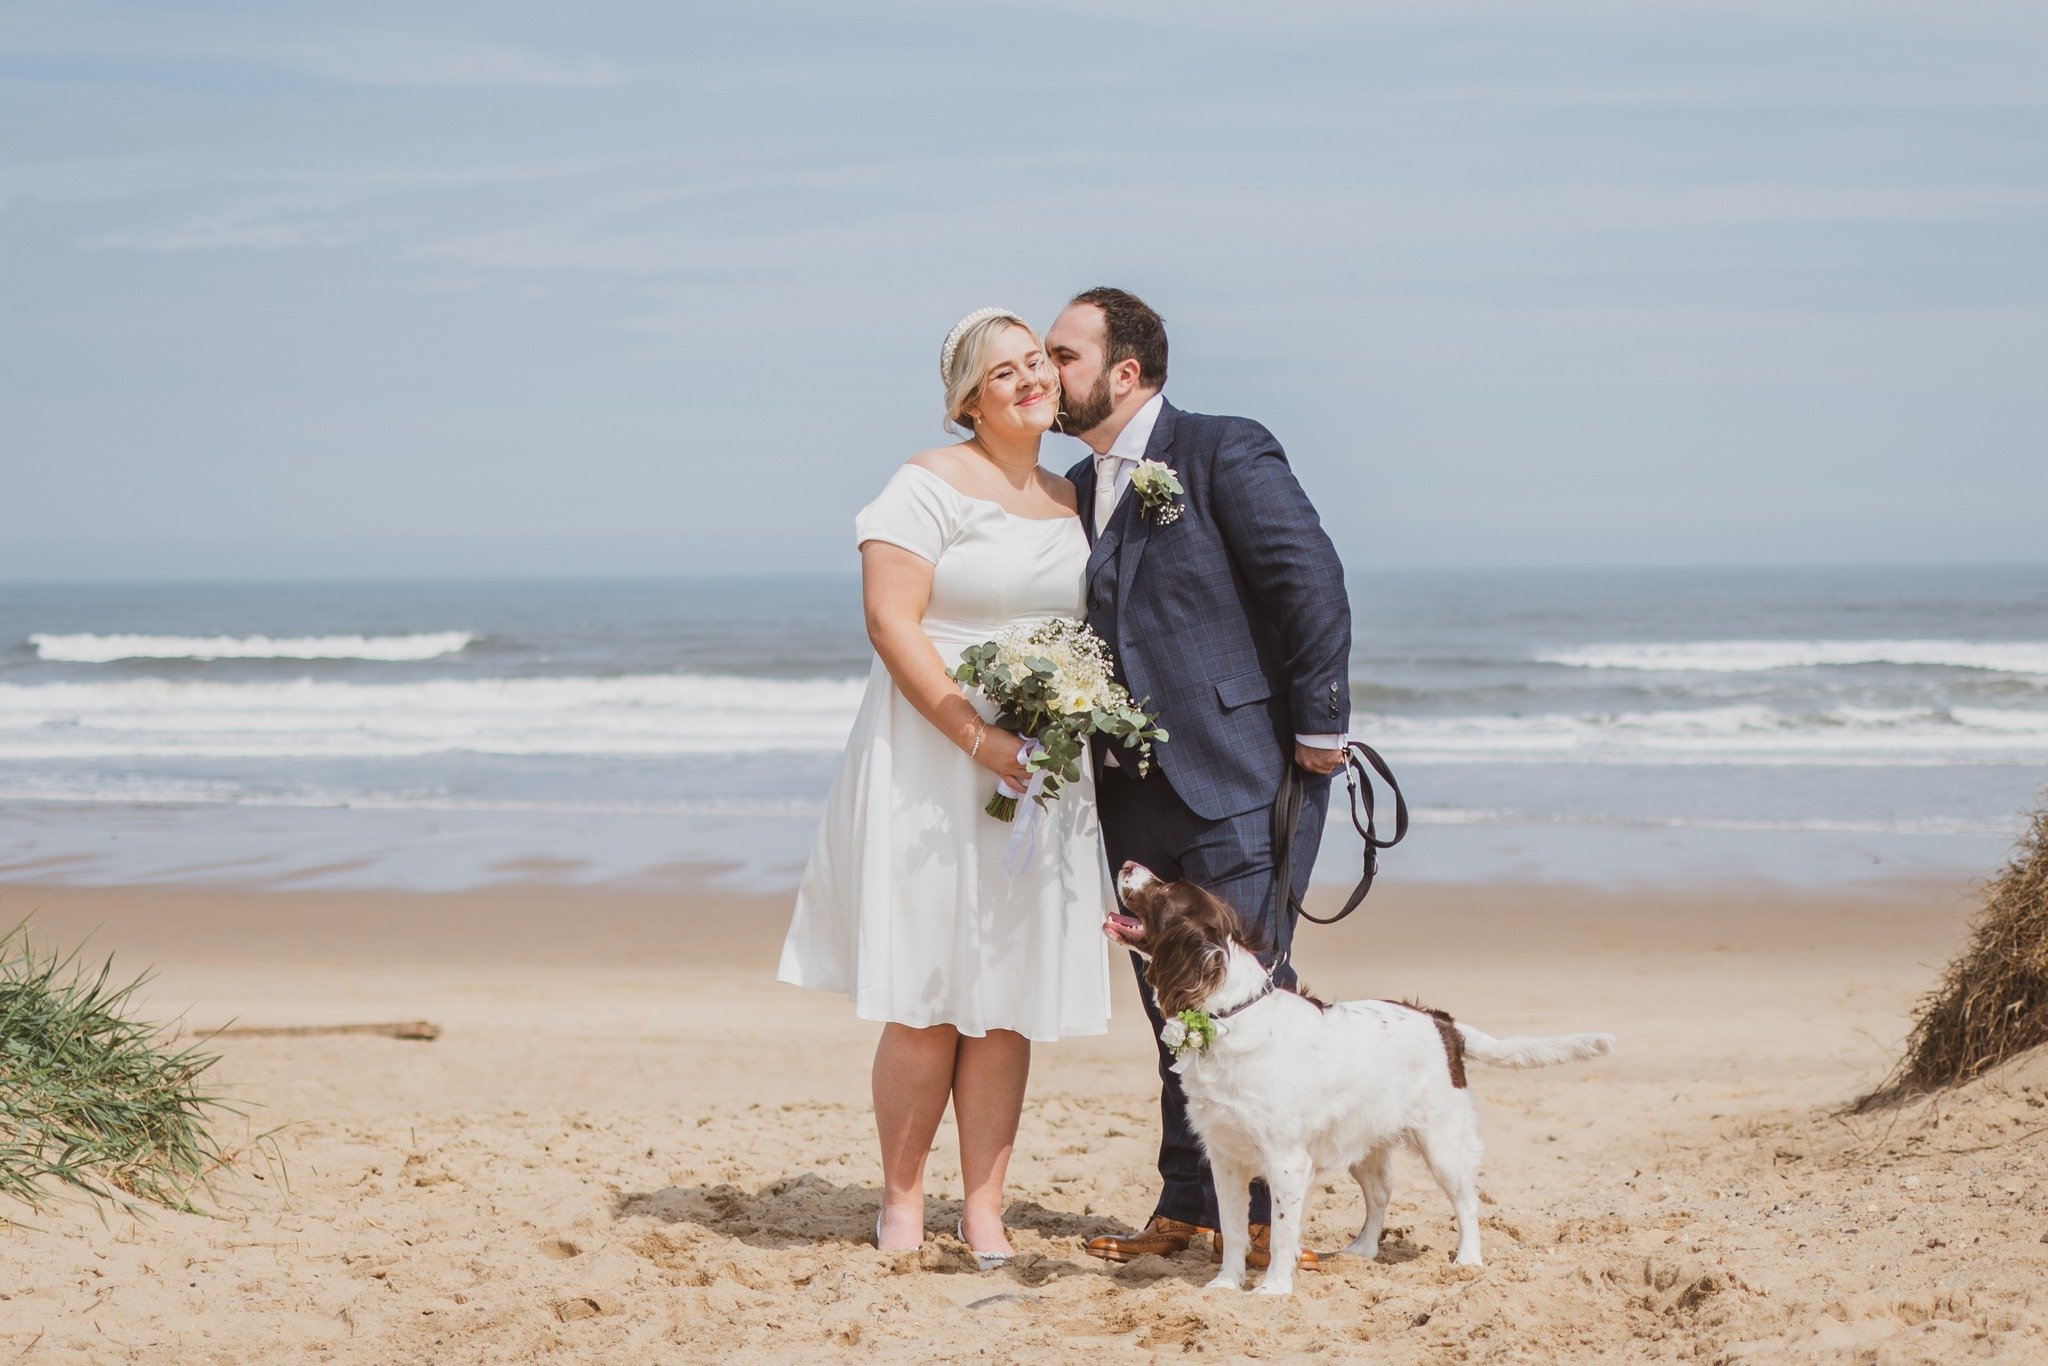 We'd like to wish a very happy first wedding anniversary to Lauren &amp; James, whose wedding we shot last year at South Shields town hall (and a bit of the beach too!)